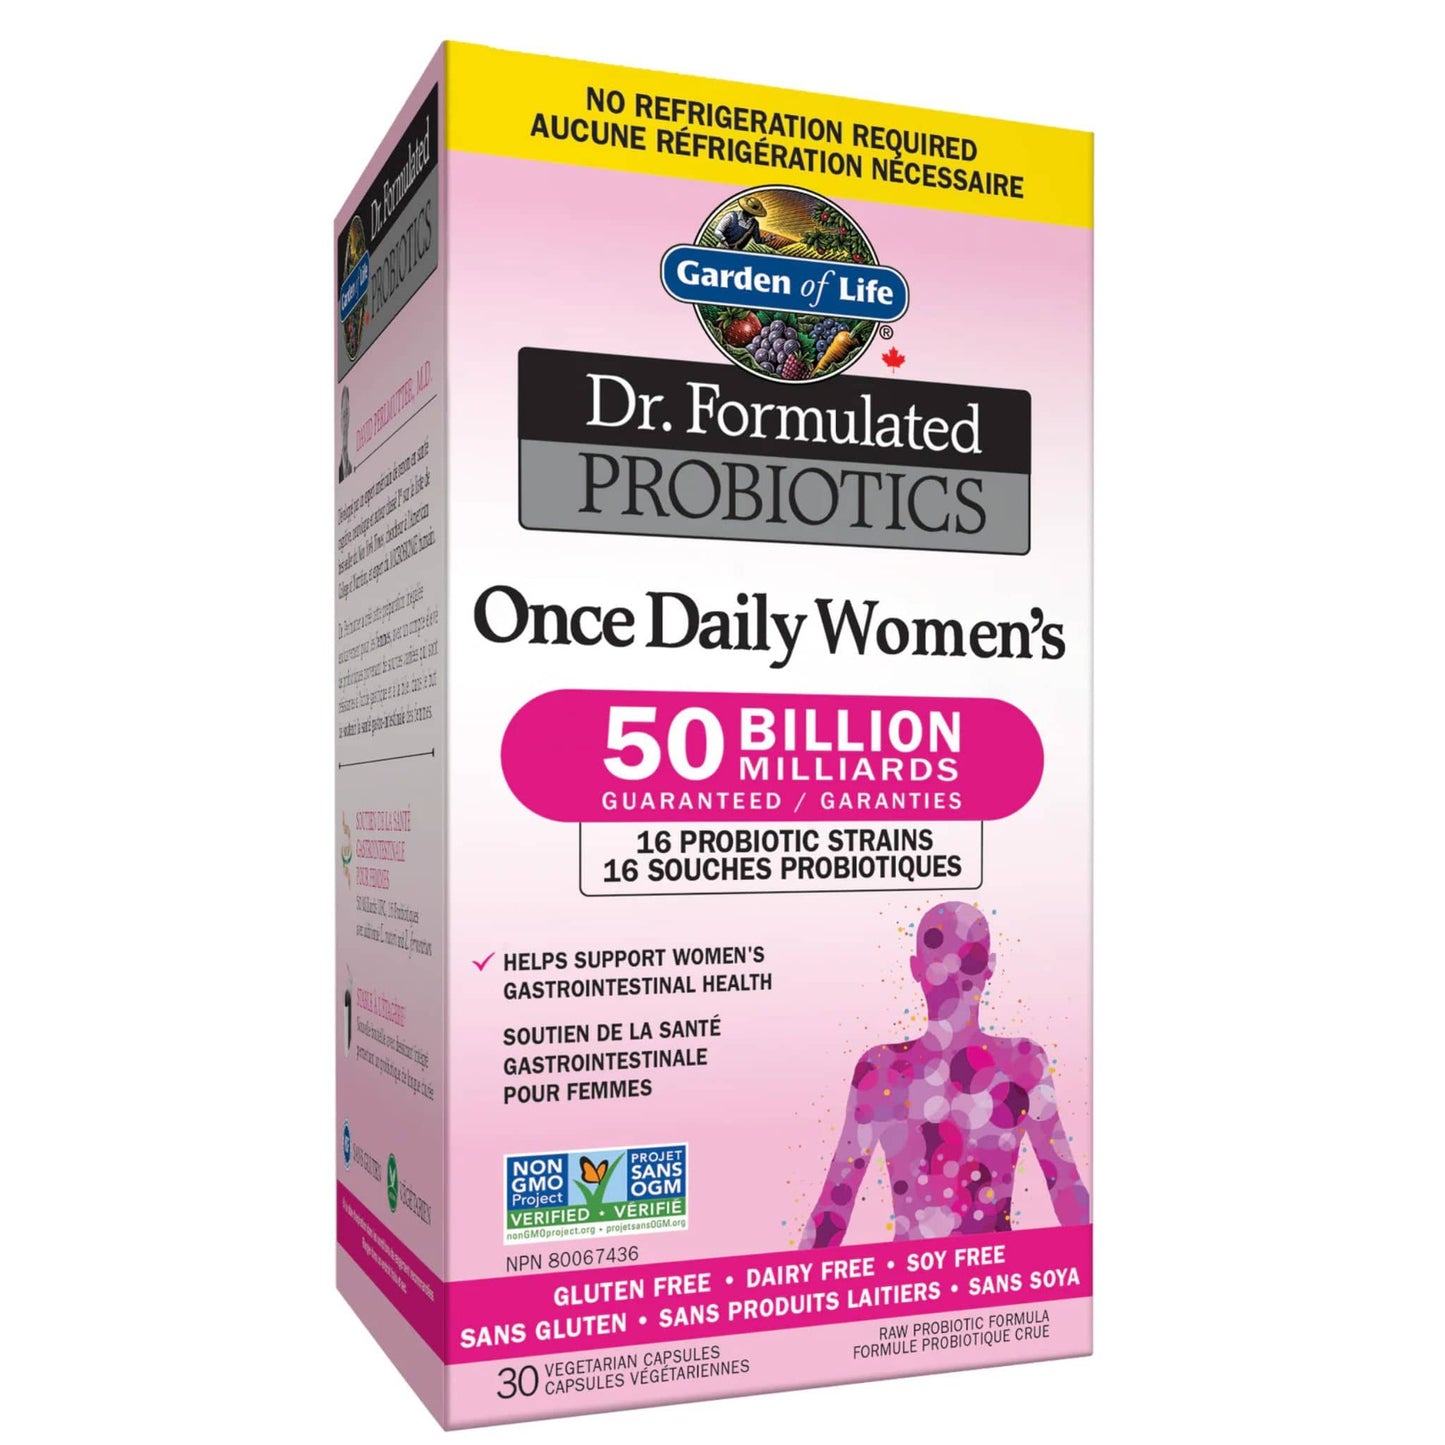 30 Vegetable Capsules | Garden of Life Dr. Formulated Probiotics Once Daily Women's 50 Billion